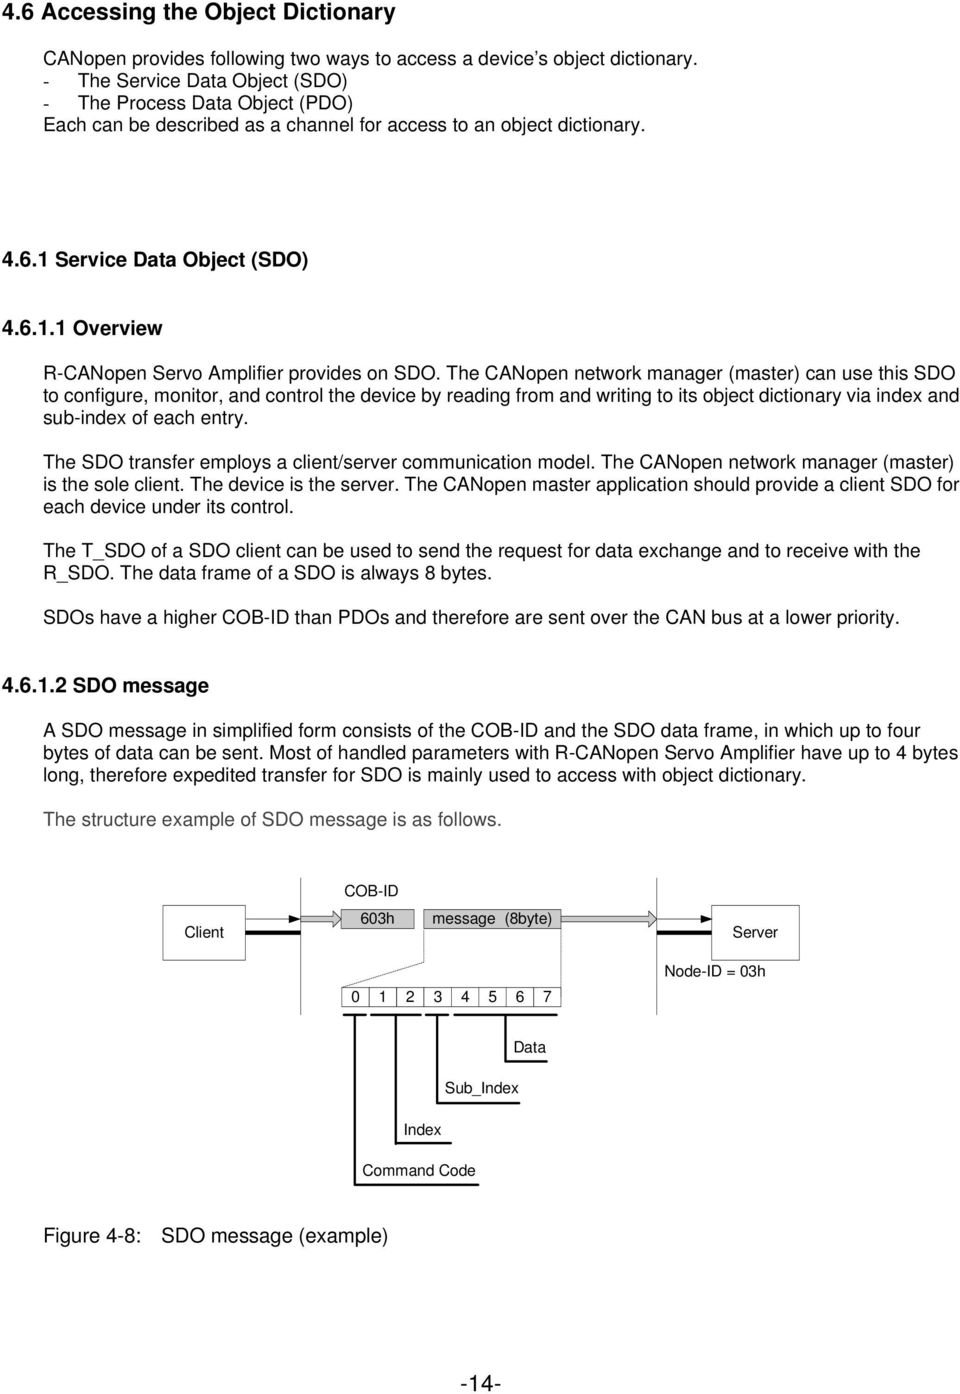 The CANopen network manager (master) can use this SDO to configure, monitor, and control the device by reading from and writing to its object dictionary via index and sub-index of each entry.